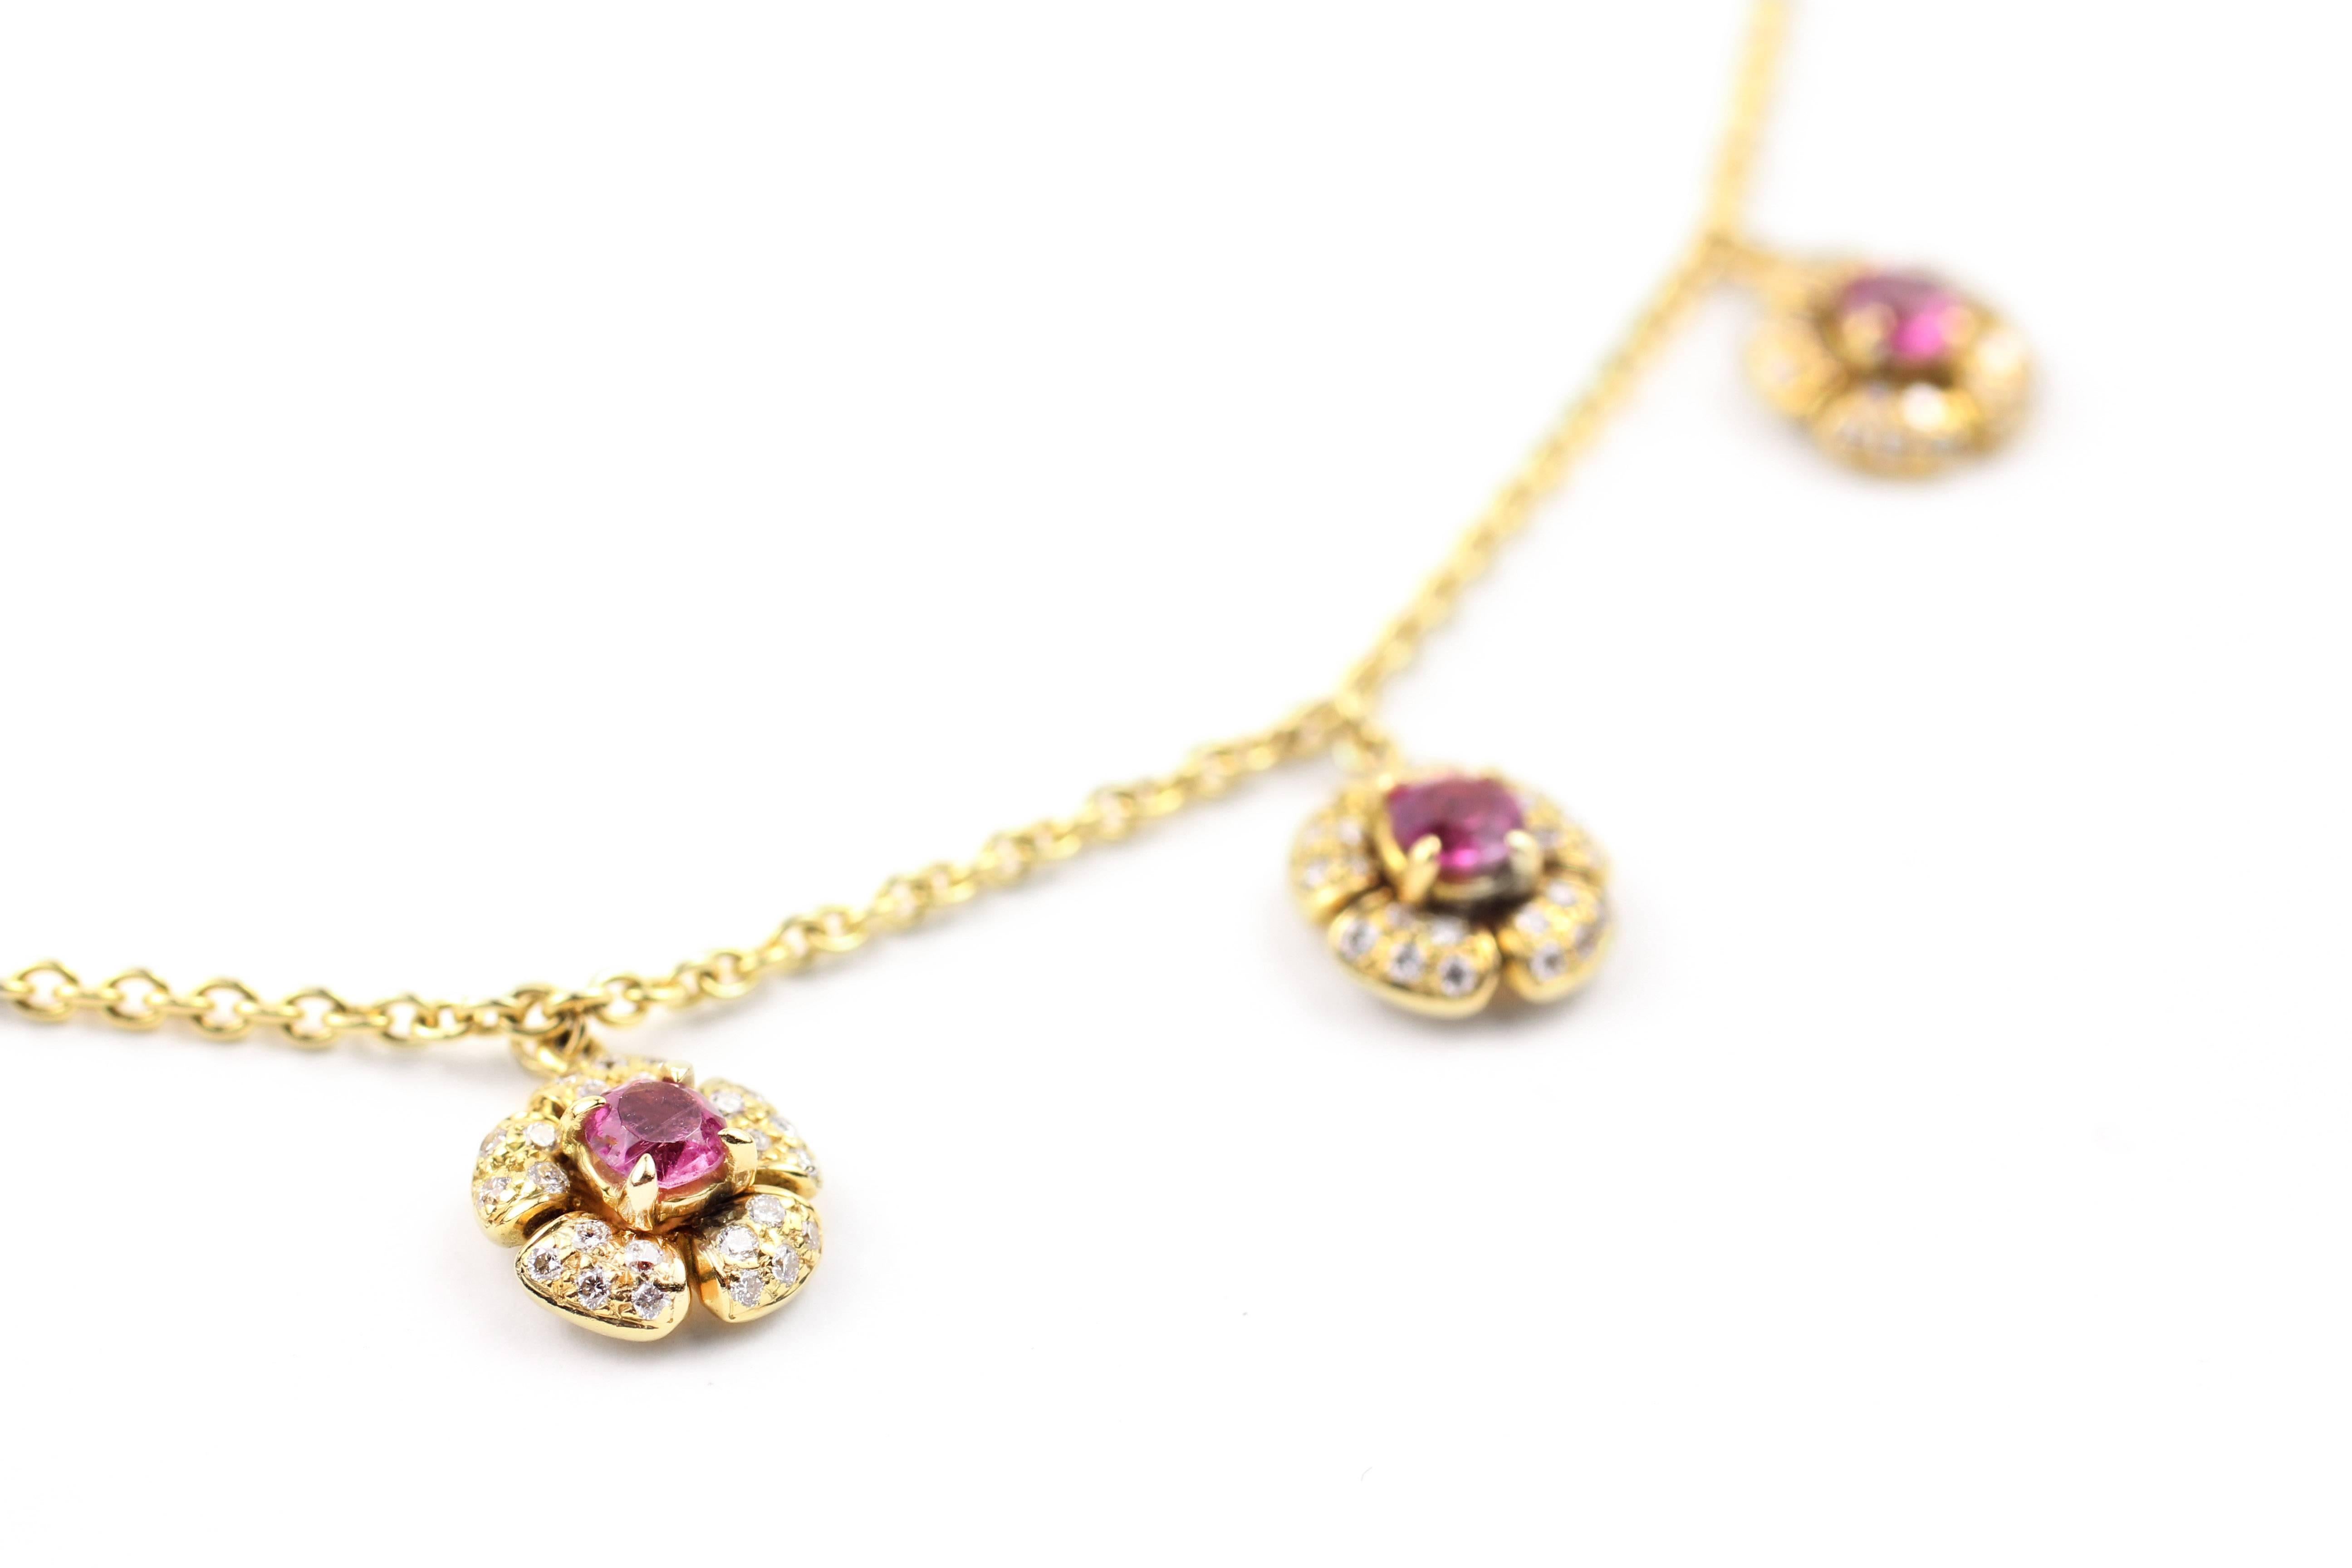 This necklace is made with a 16 inch 18kt gold chain and five 18kt gold flowers containing pink tourmalines (.71cts) and brilliant diamonds at .51 cts.

Designed and made in-house by Julius Cohen New York.